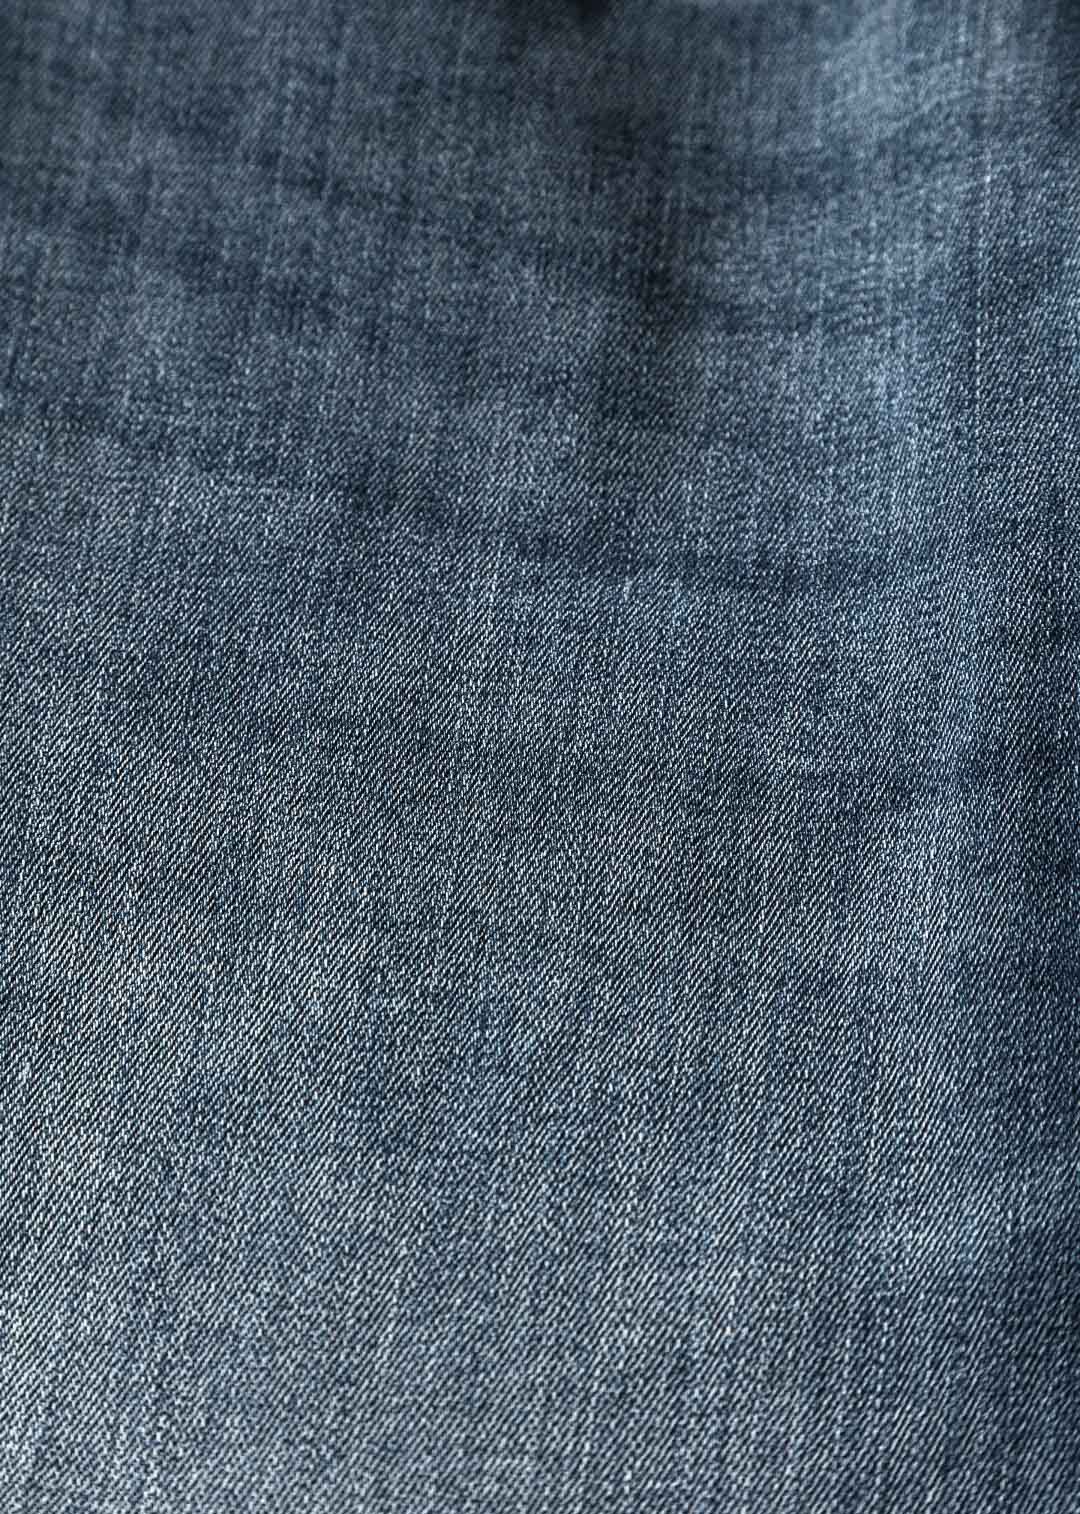 140 cm Stretch Denim fabric by the meter : Amazon.co.uk: Home & Kitchen